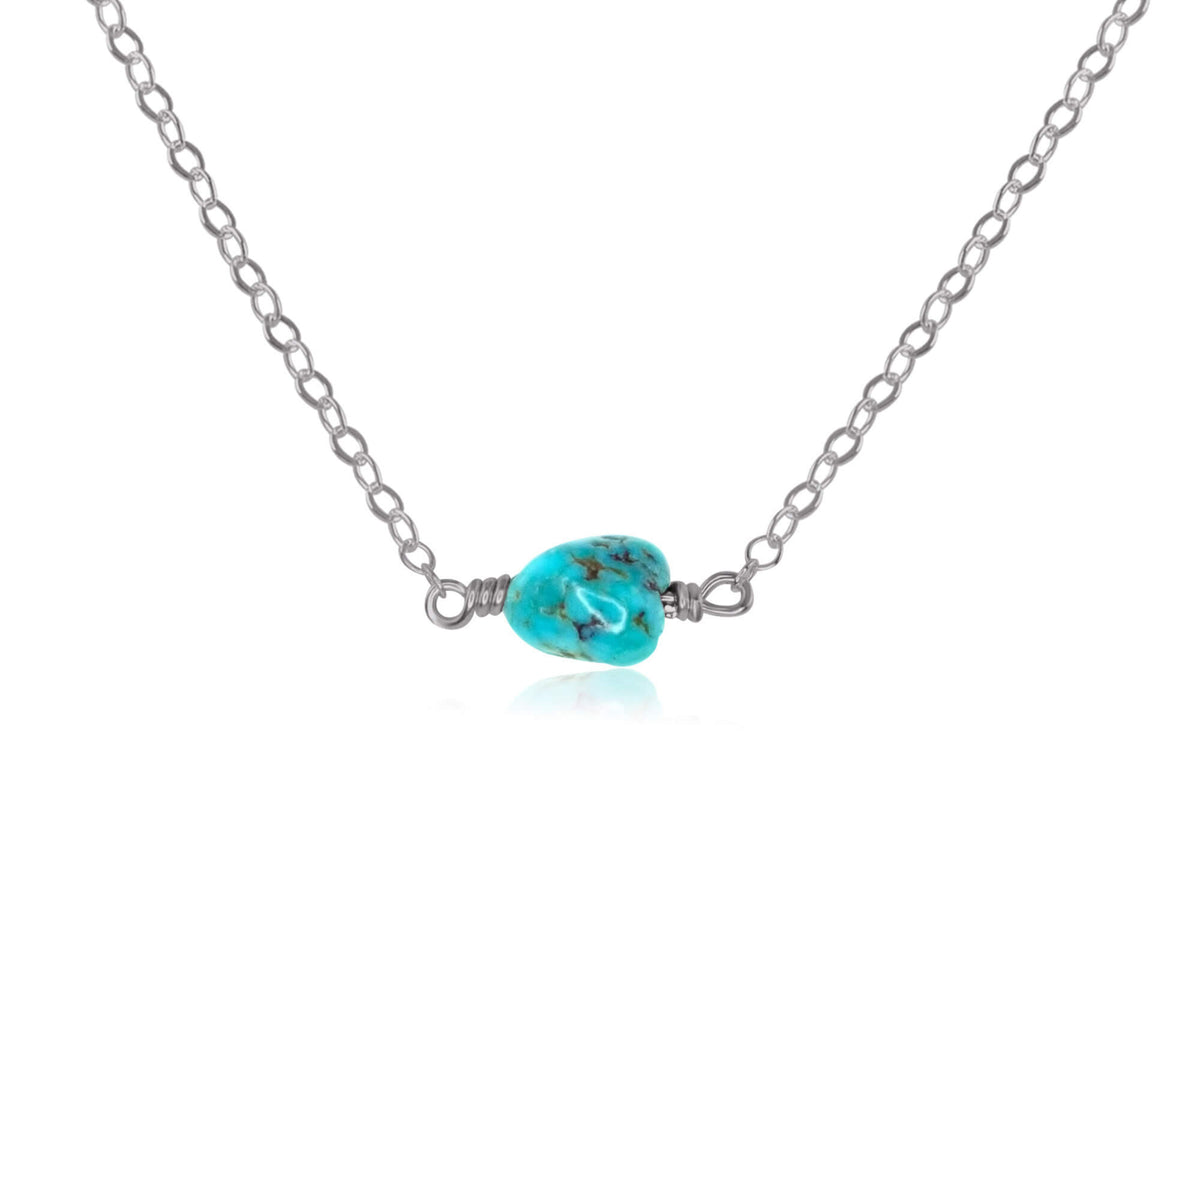 Raw Nugget Necklace - Turquoise - Stainless Steel - Luna Tide Handmade Jewellery